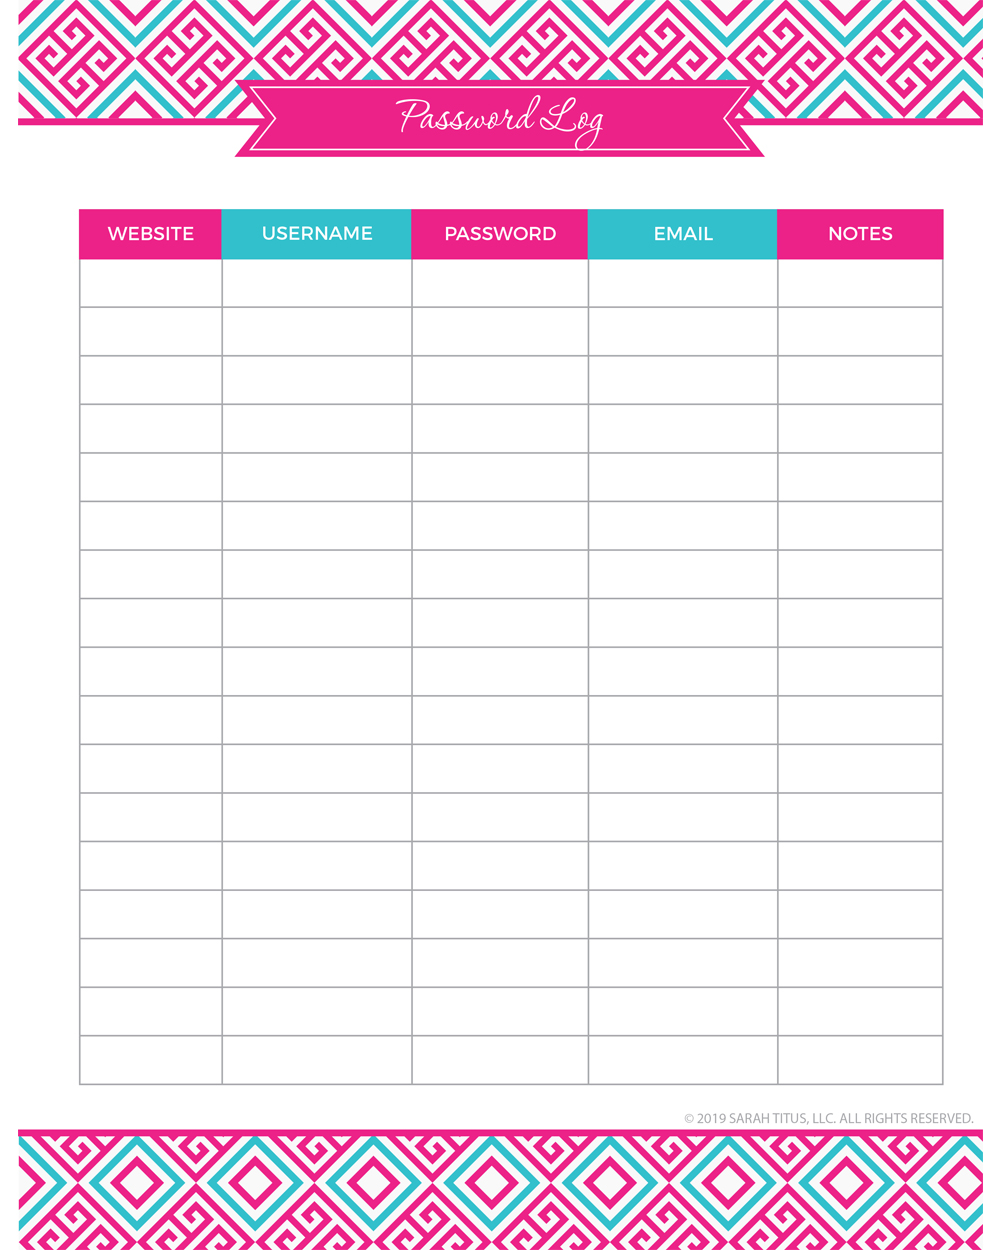 Password Logs & Trackers - 25 FREE Printables